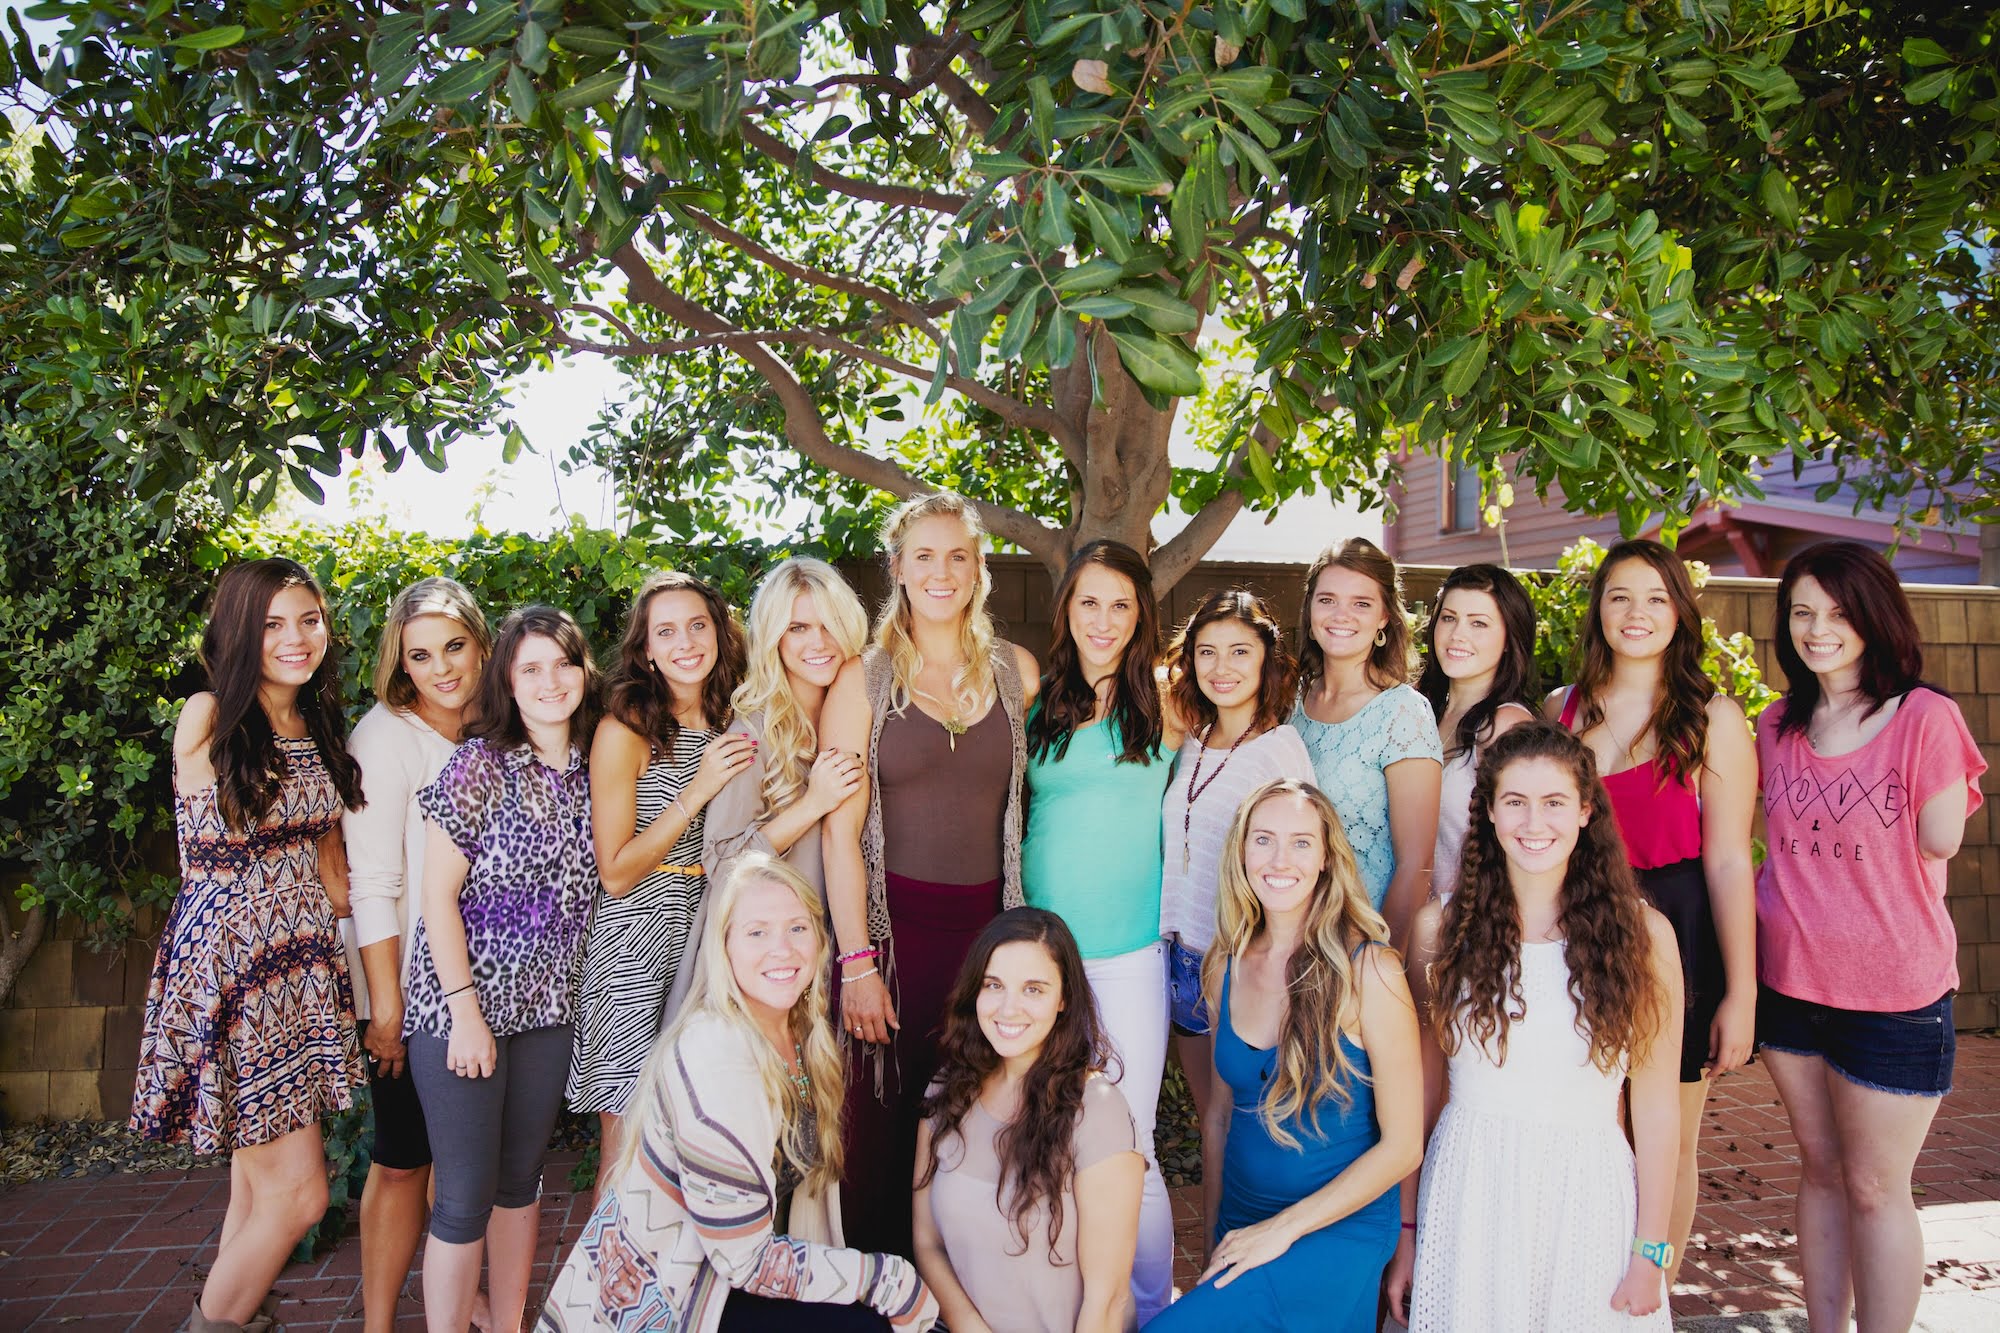 Group photo from the first Beautifully Flawed Retreat in 2013